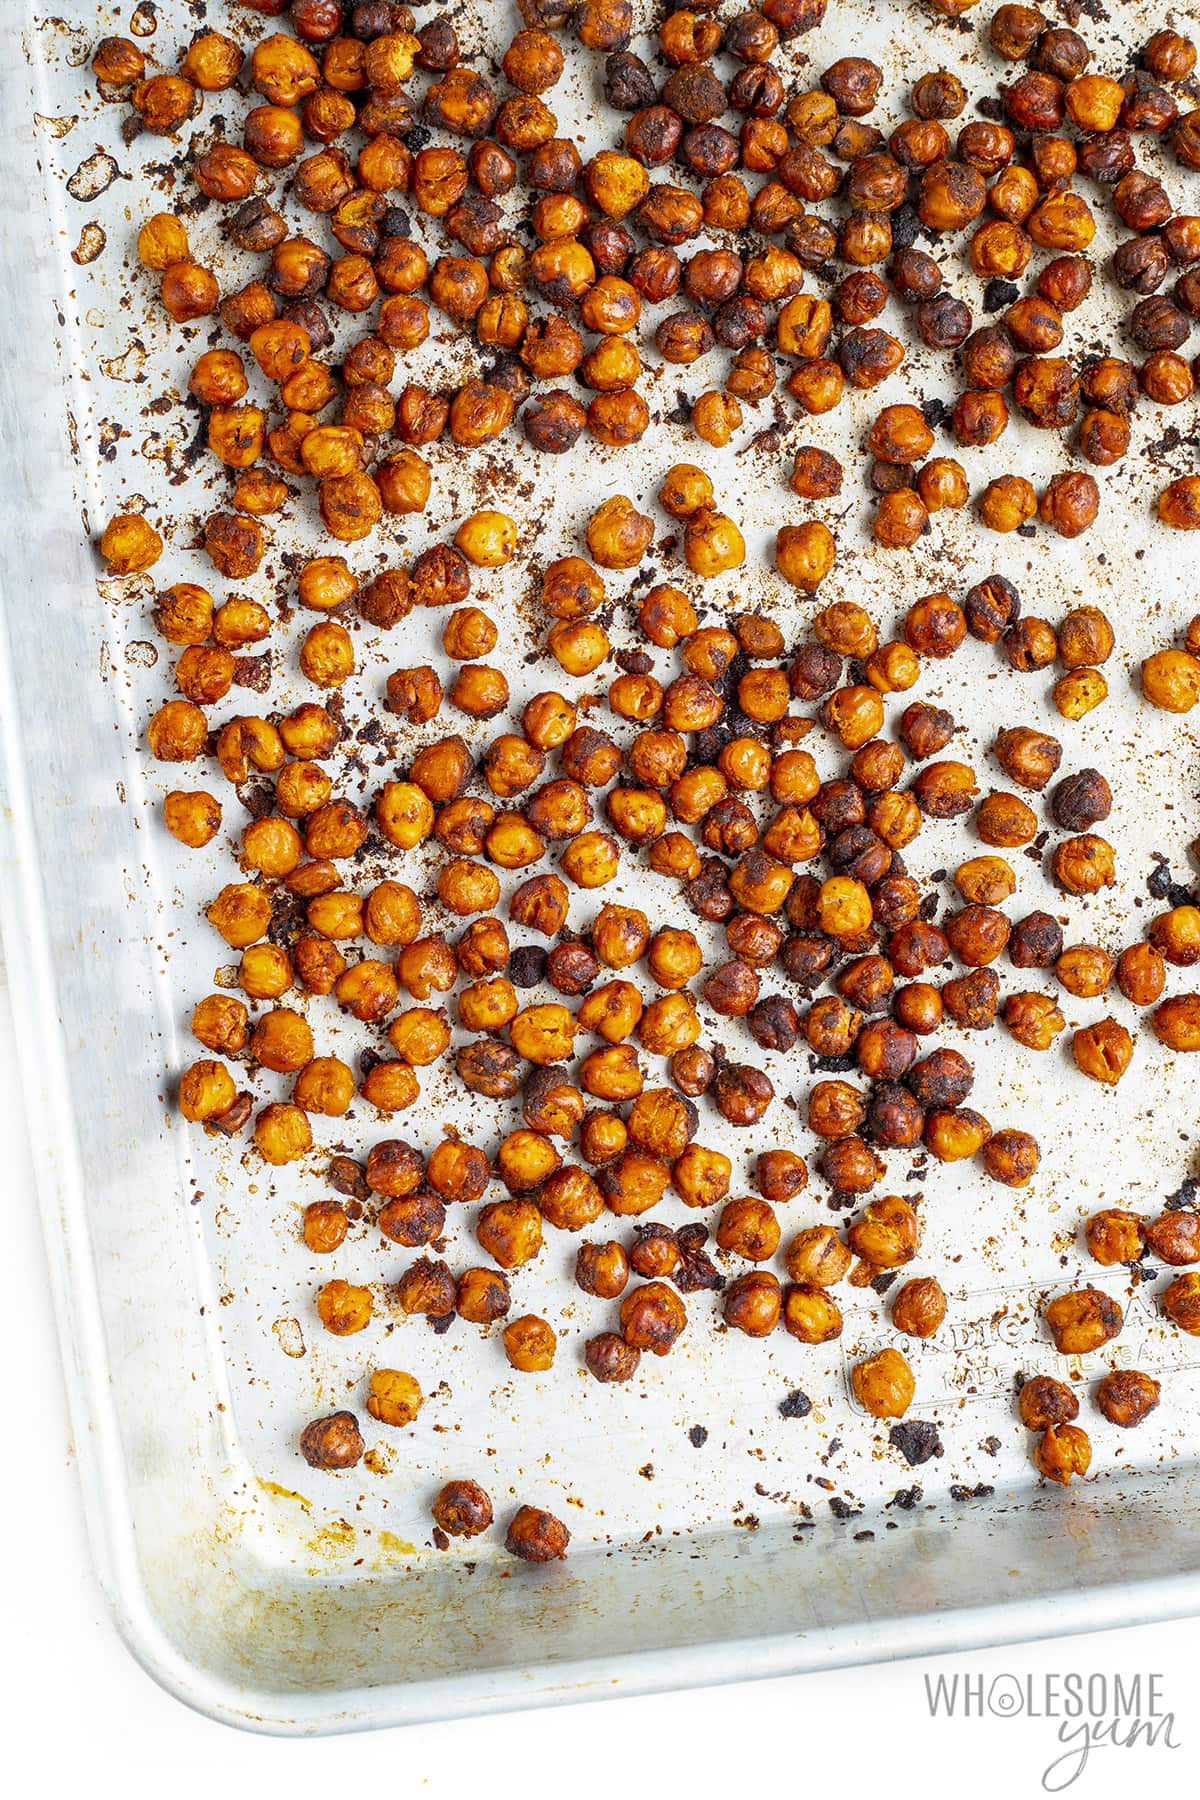 Roasting chickpeas makes them come out crispy like these.